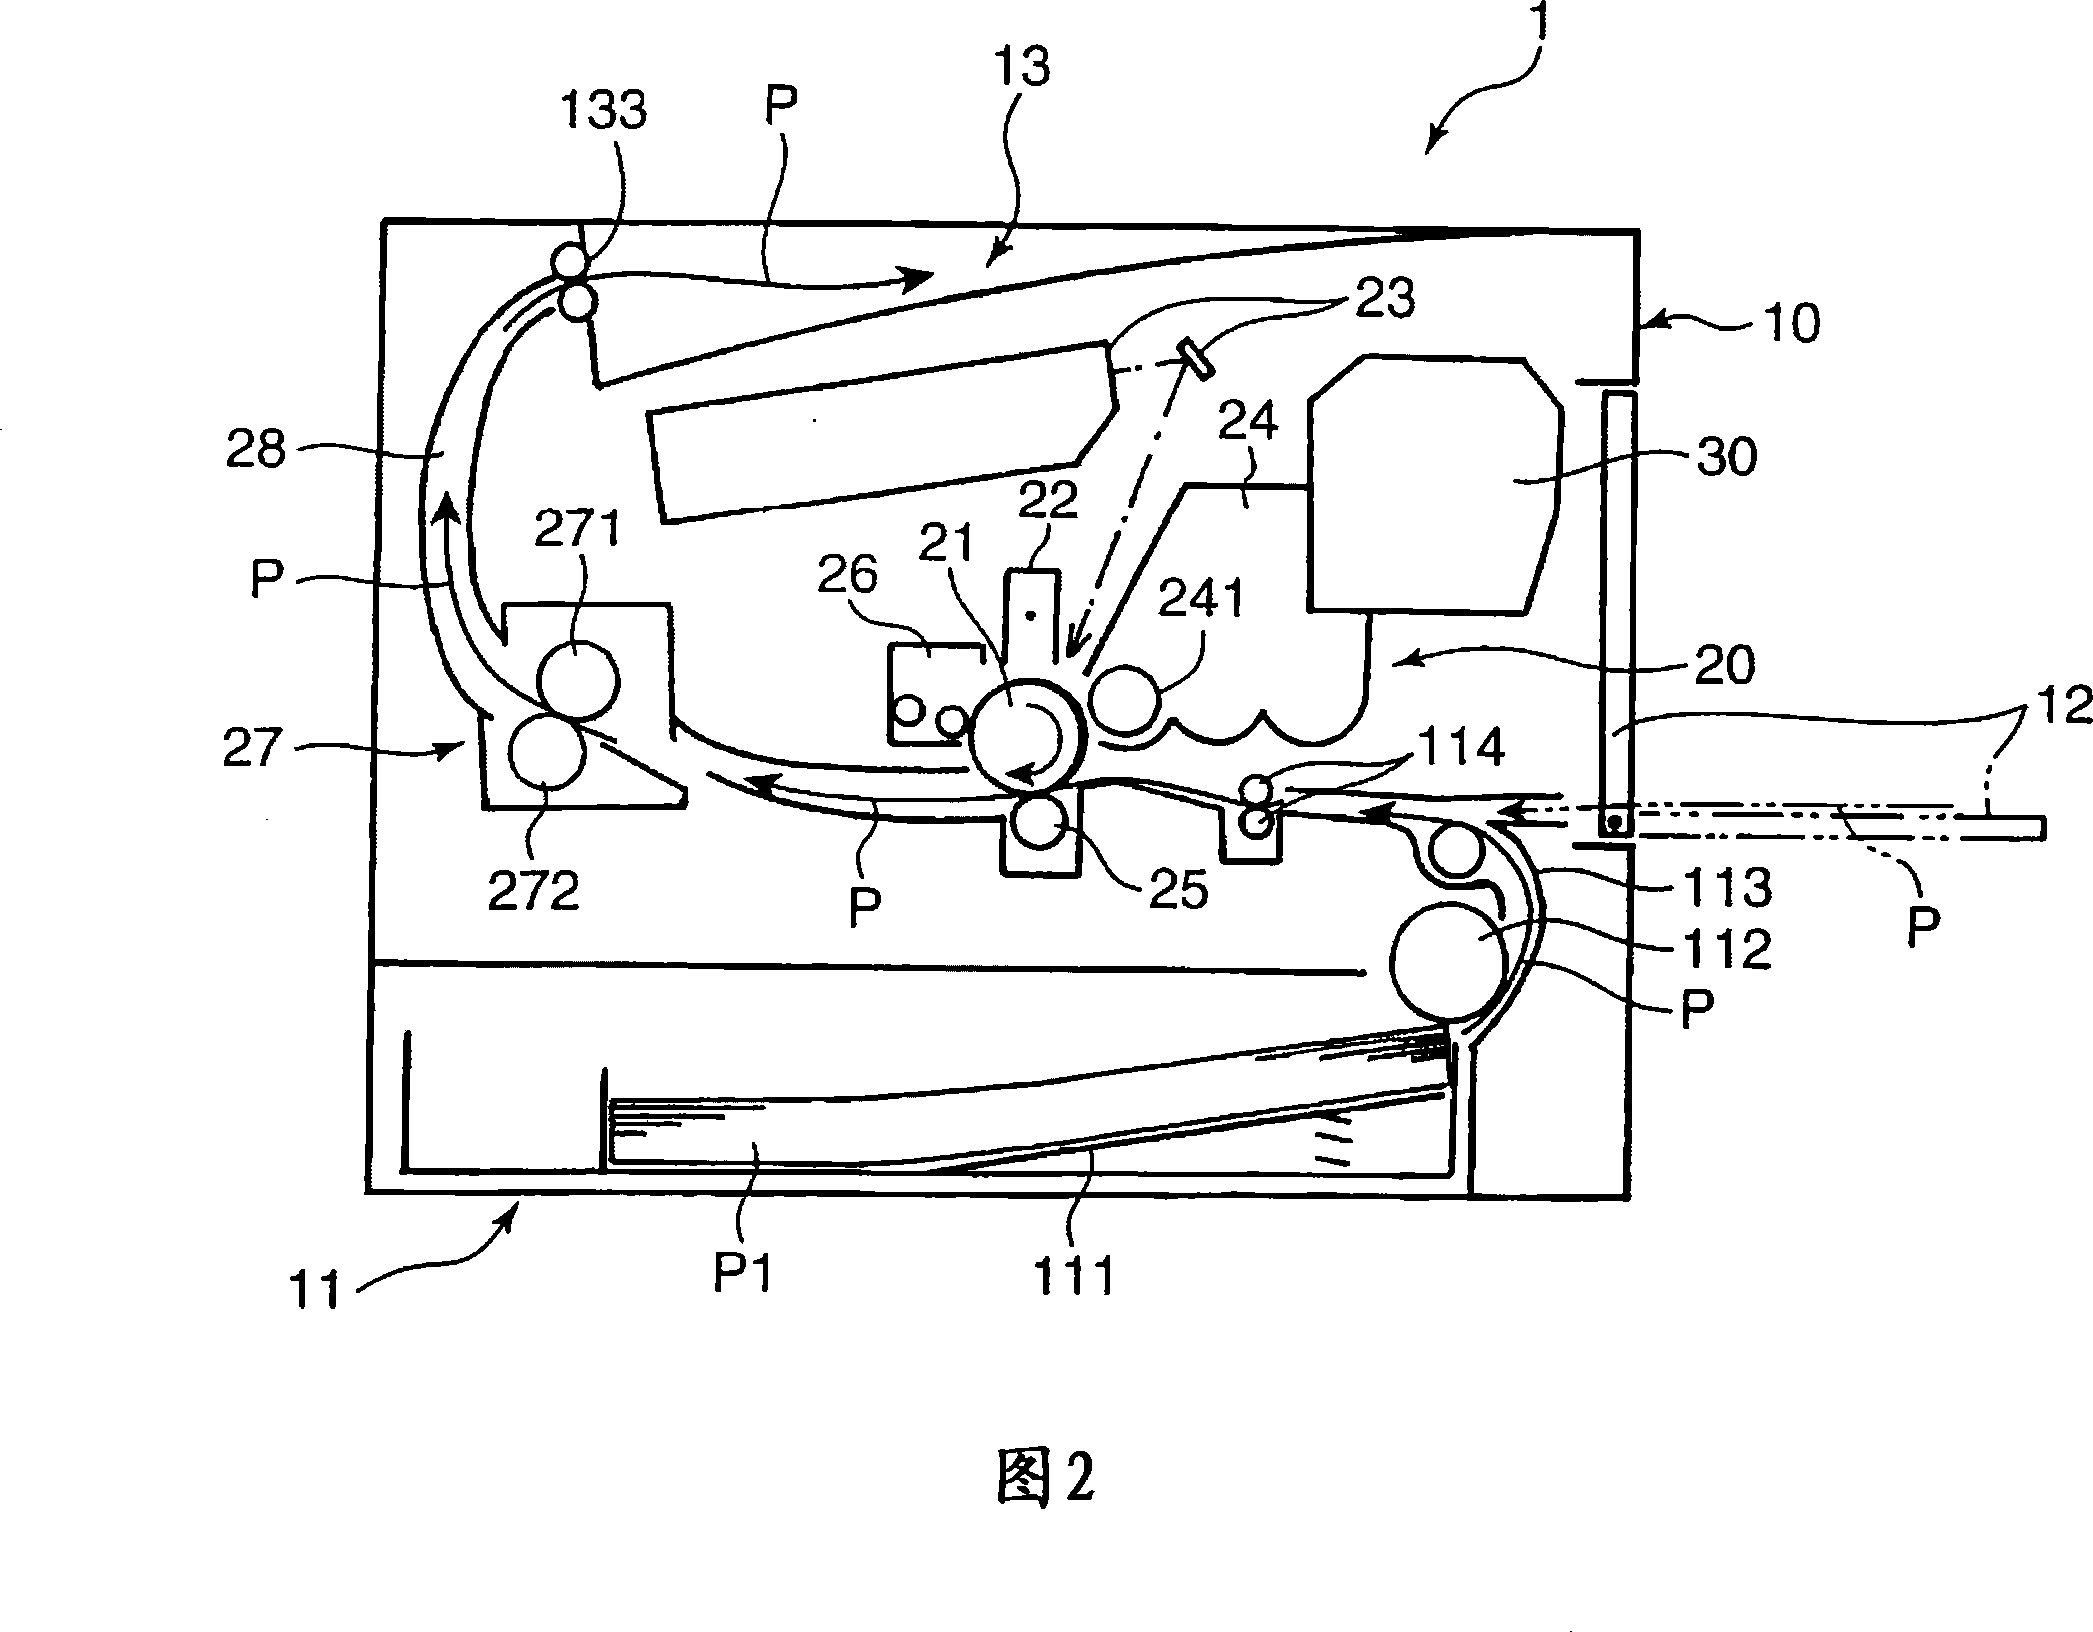 Image forming apparatus and apparatus for receiving consumable supplying member